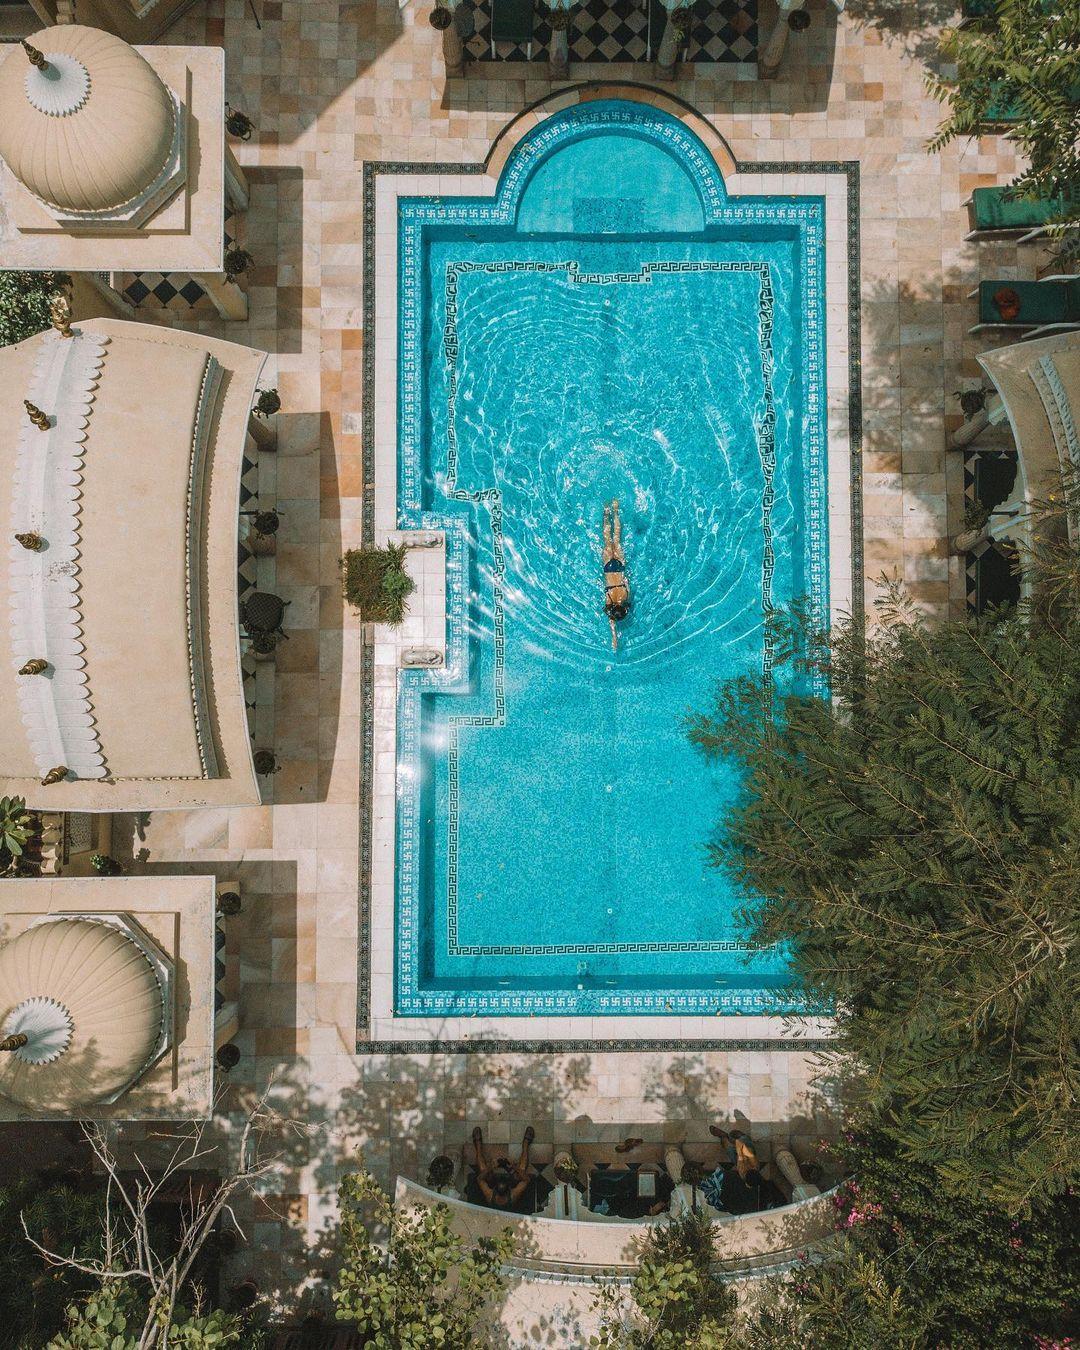 Alsisar Haveli Jaipur is the best mid-range staycation in Rajasthan - Such a beautiful pool and what royal architecture